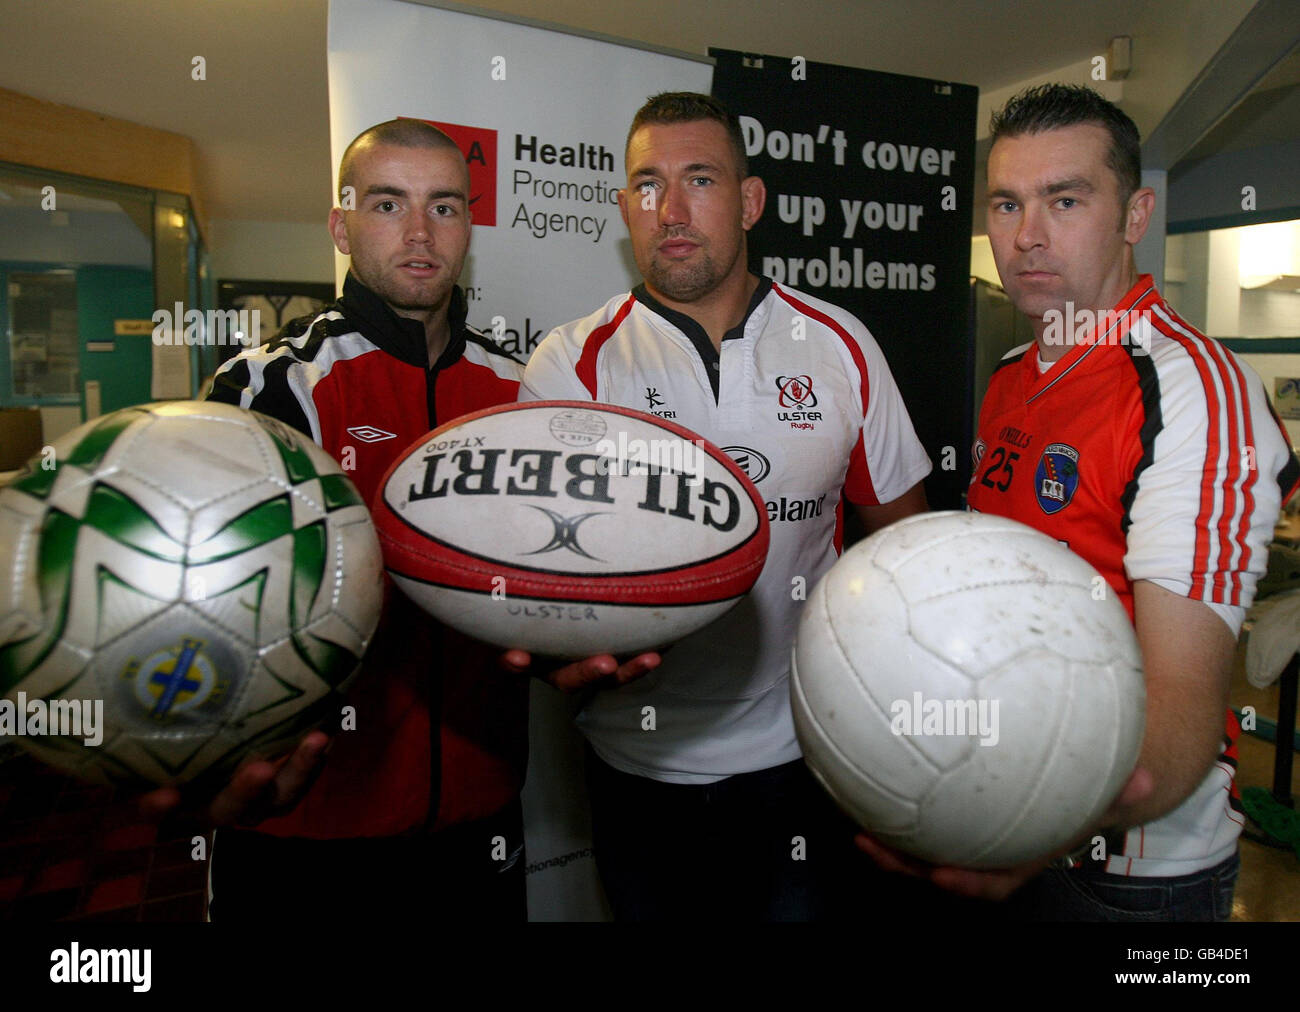 Ulster sportsmen (left to right) Crusaders' Colin Coates, Ulster Rugby's Justin Fitzpatrick and Armagh's Oisin McConville, at the launch of a health campaign aimed at young men in Belfast. Stock Photo